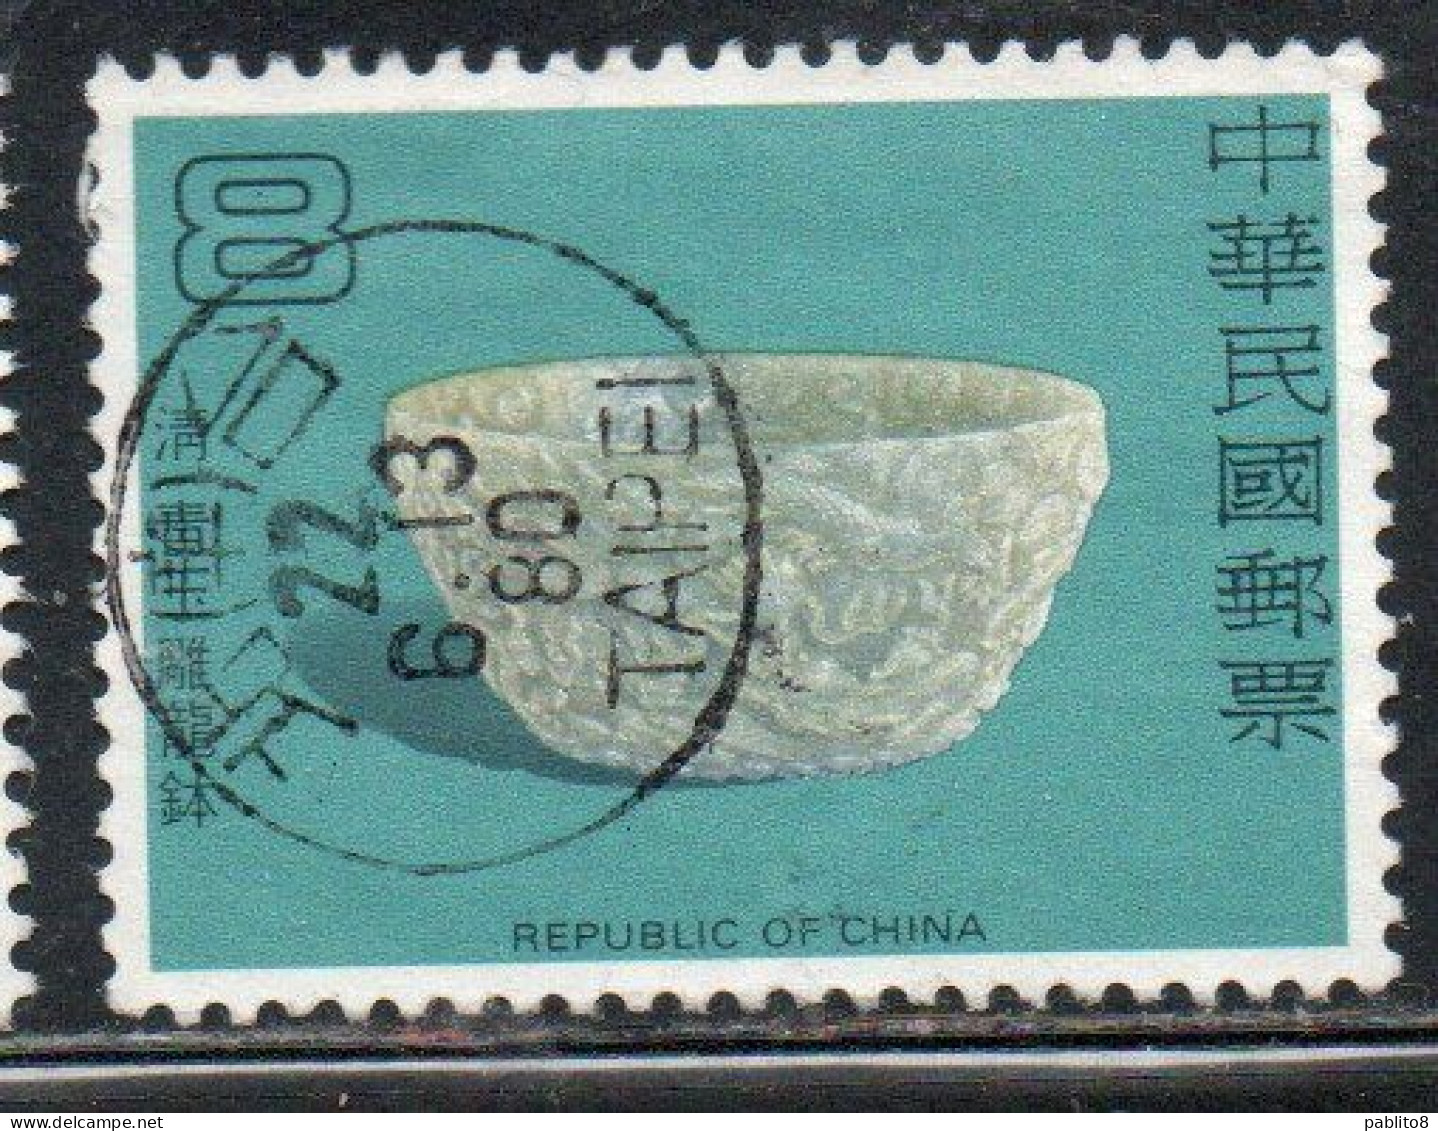 CHINA REPUBLIC CINA TAIWAN FORMOSA 1980 JADE POTTERY MONK'S ALMS BOWL CH'ING DYNASTY 8$ USED USATO OBLITERE' - Used Stamps